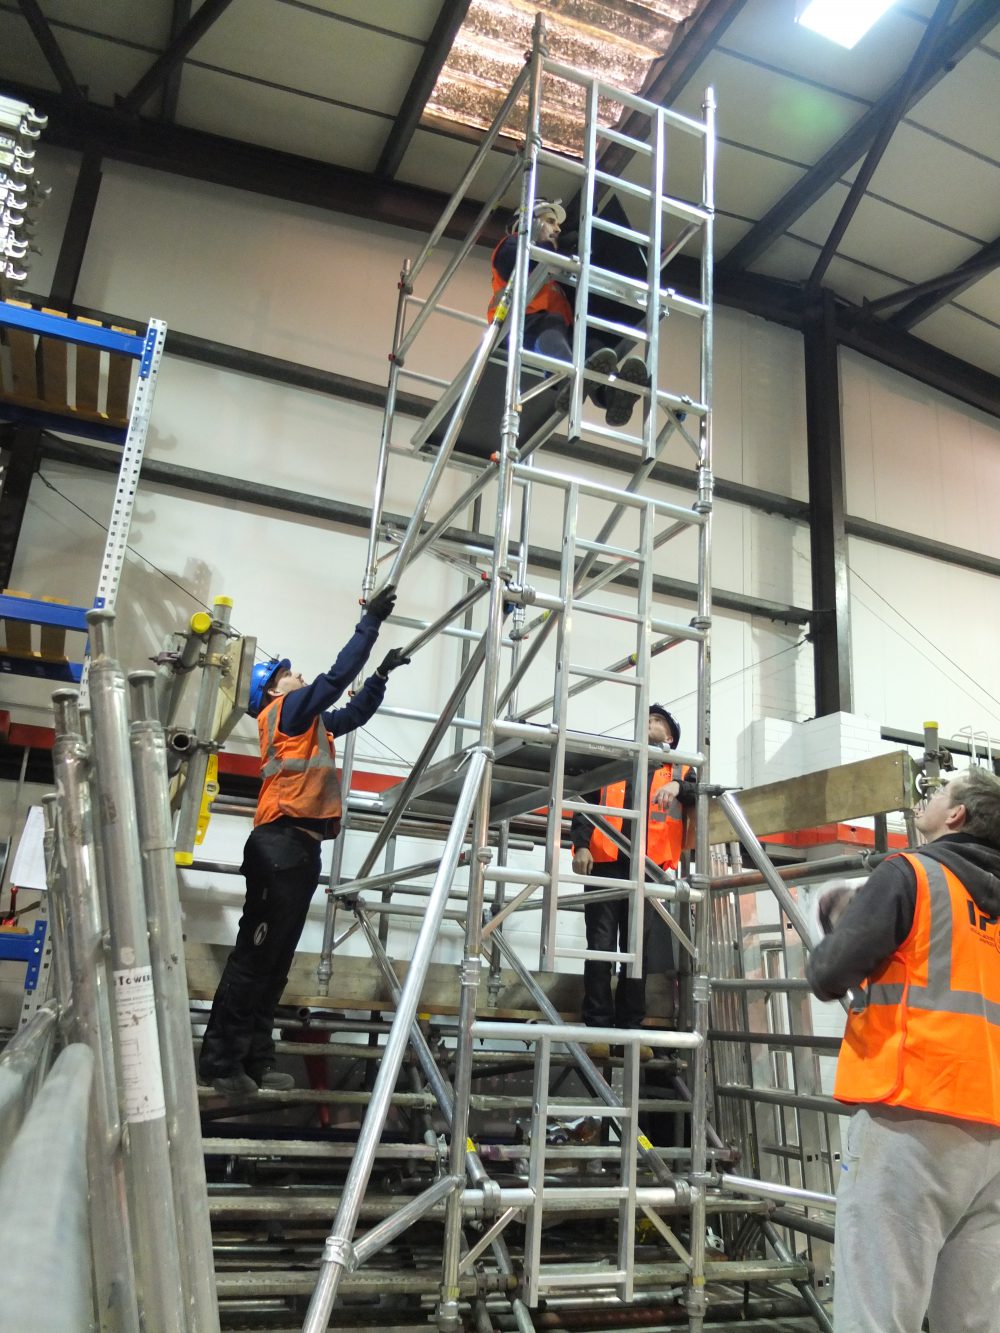 pasma stairs towers training ladders courses